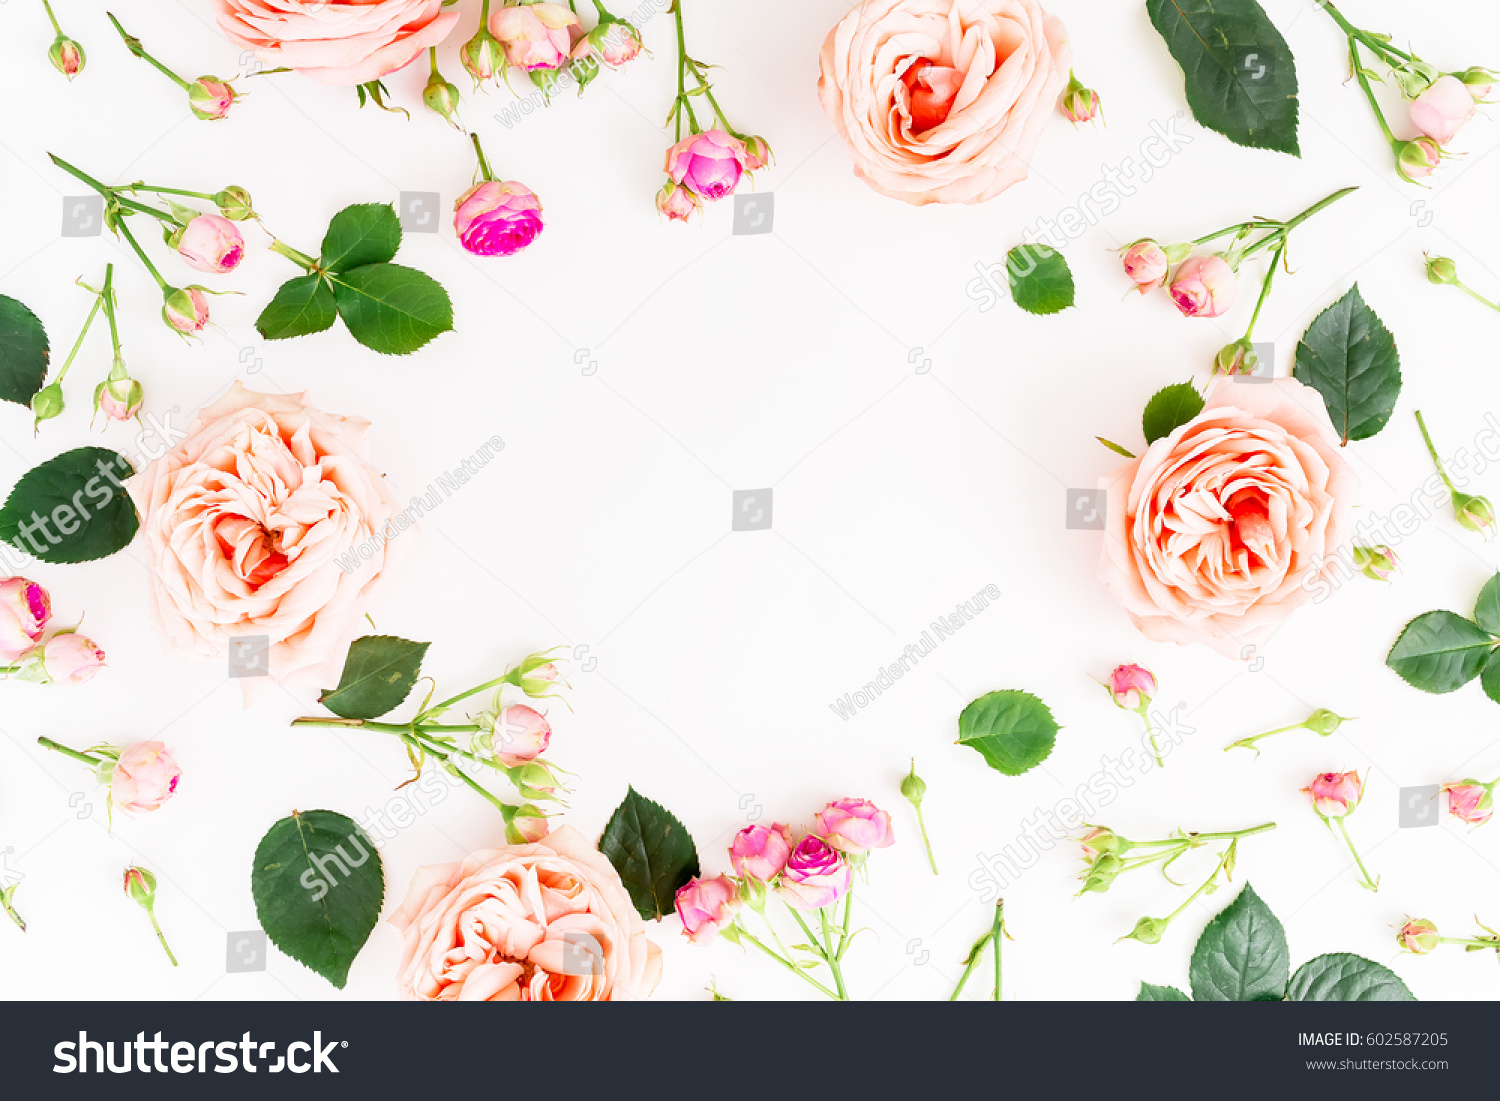 Floral round frame with pink roses and leaves on white background. Flat lay, top view. Frame background #602587205